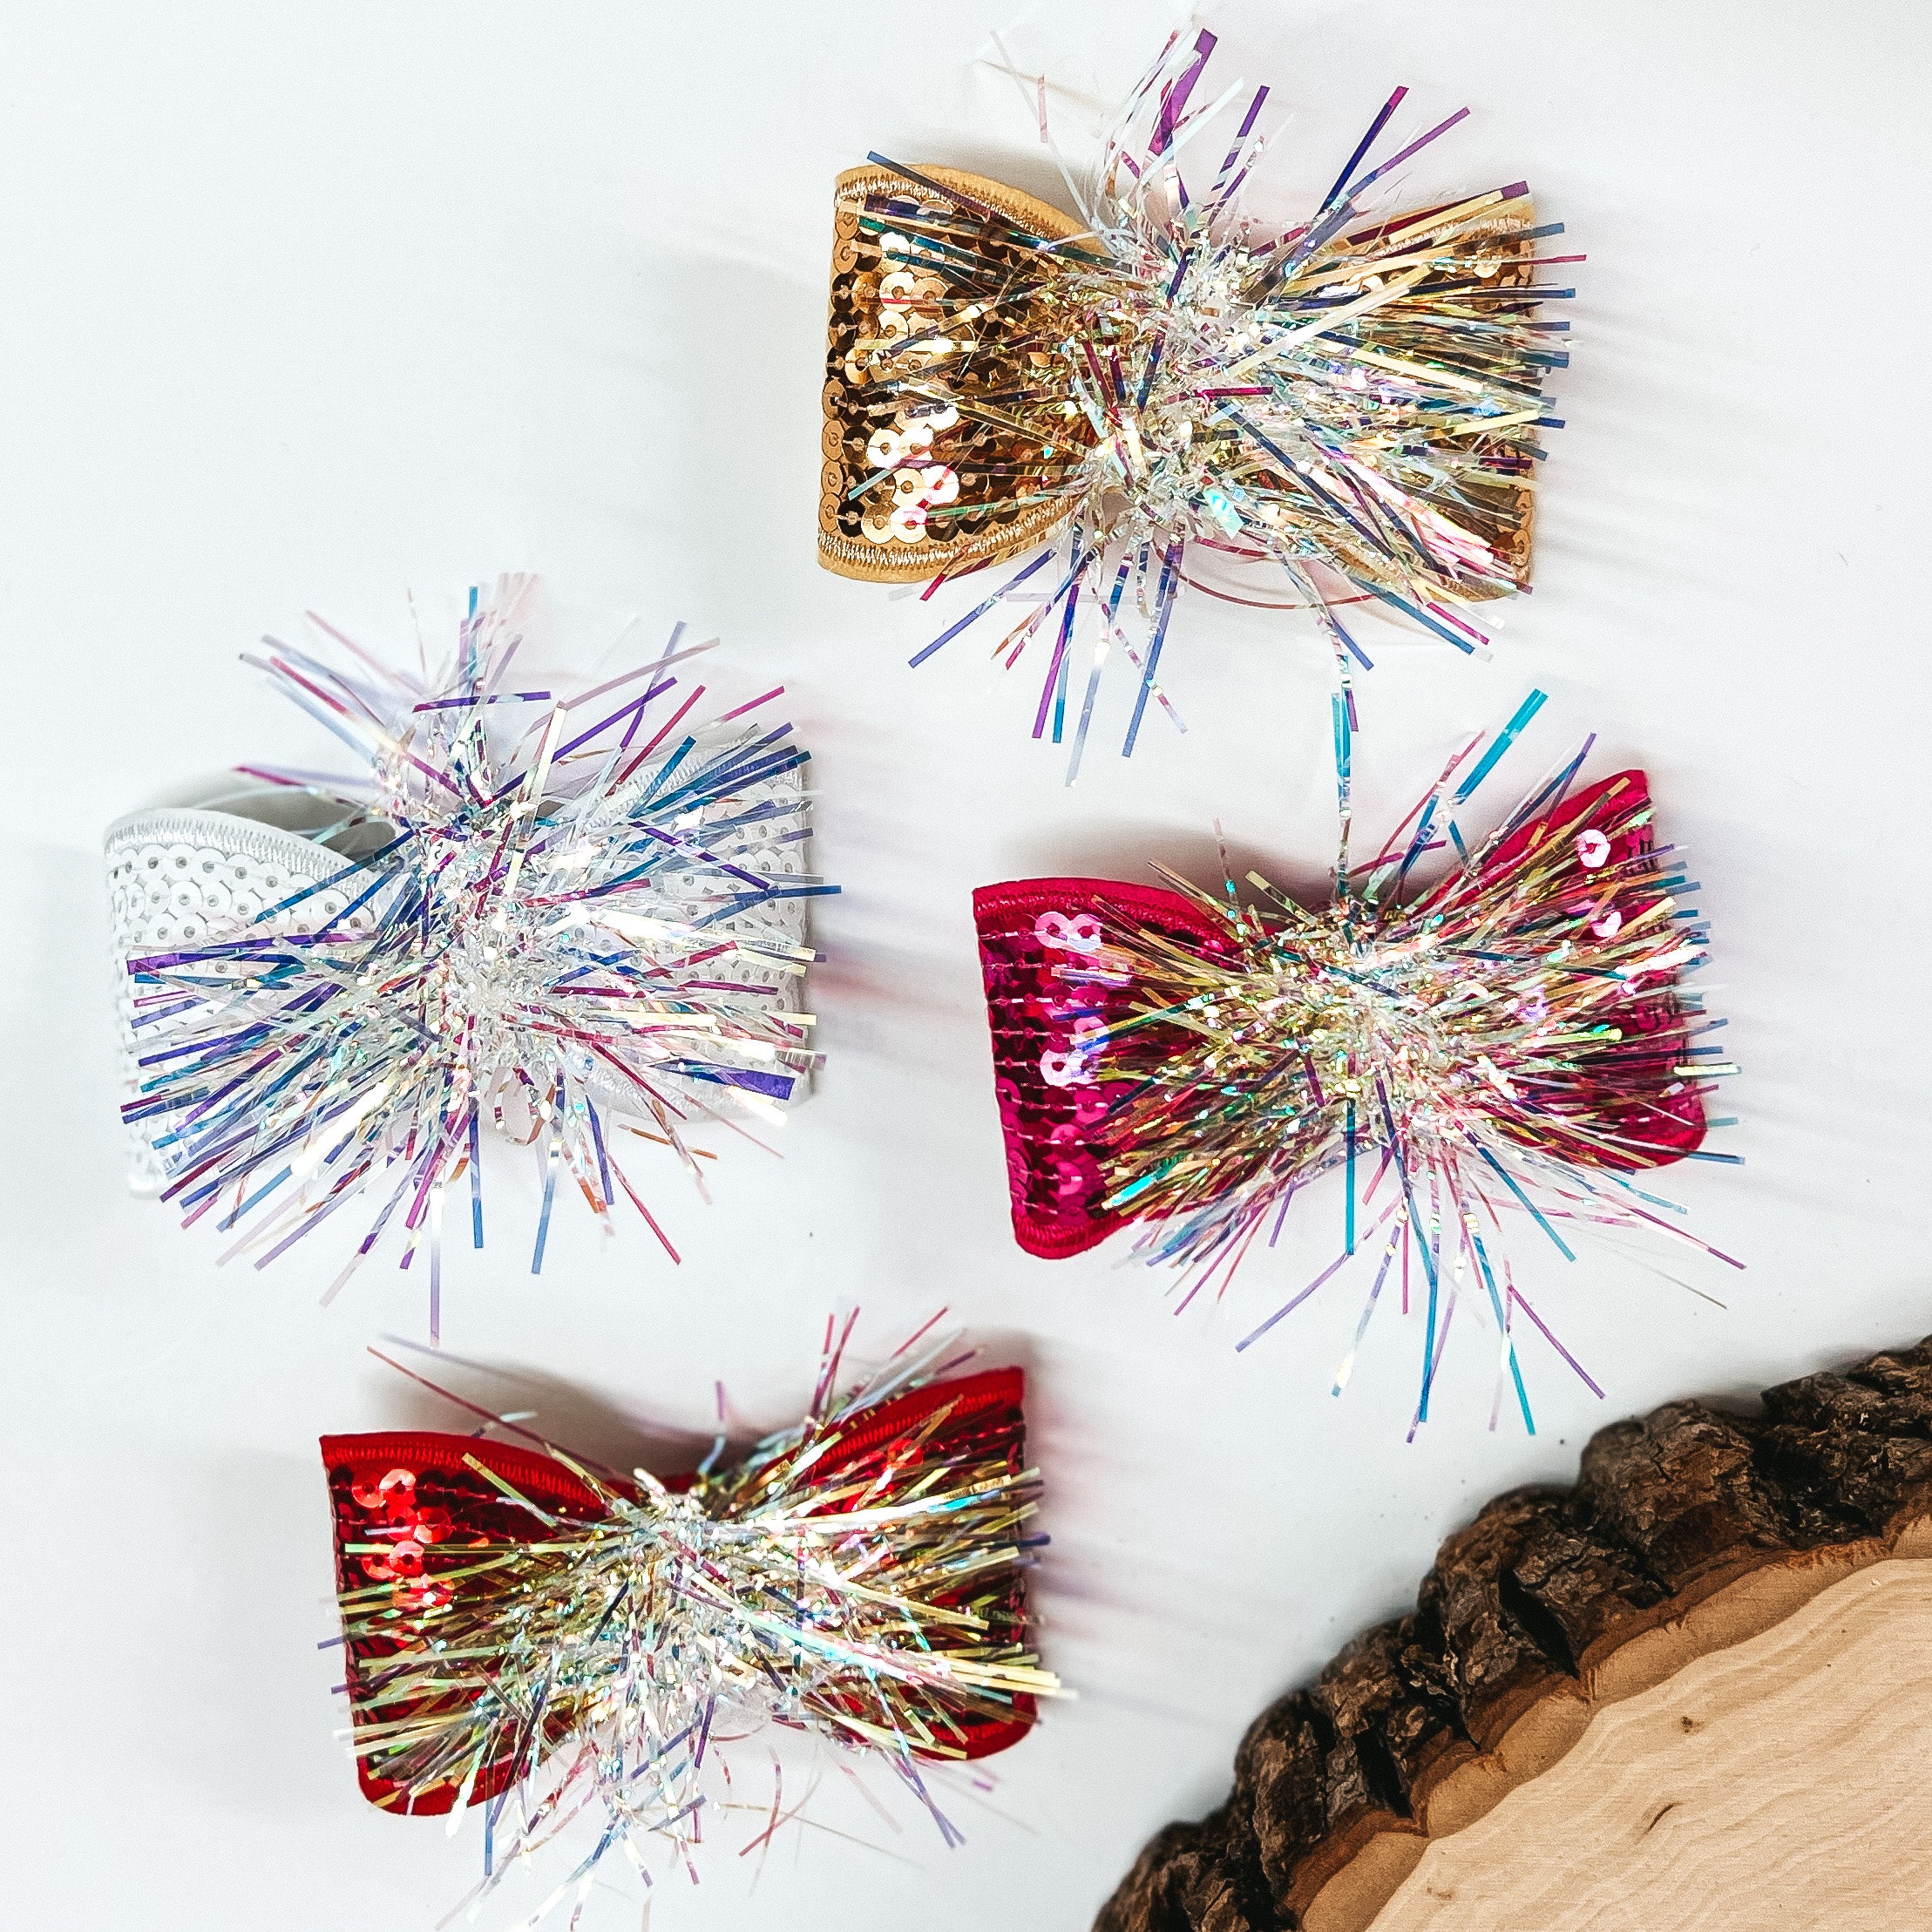 There are four sequins bows with a tinsel center. From top to bottom; gold, white, hot pink, and red. These bows are laying on a white background with a slab of wood in the corner as decor.